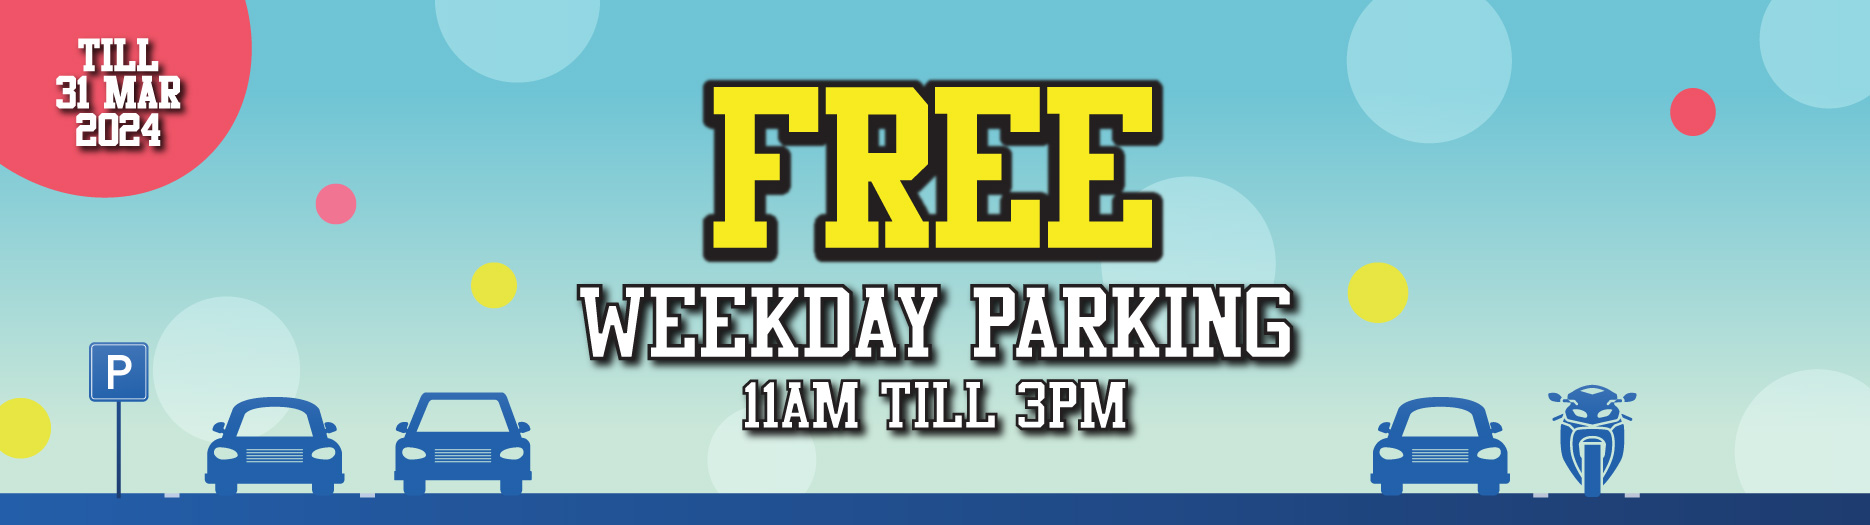 Free Weekday Parking Web-banners_1870-x-525px